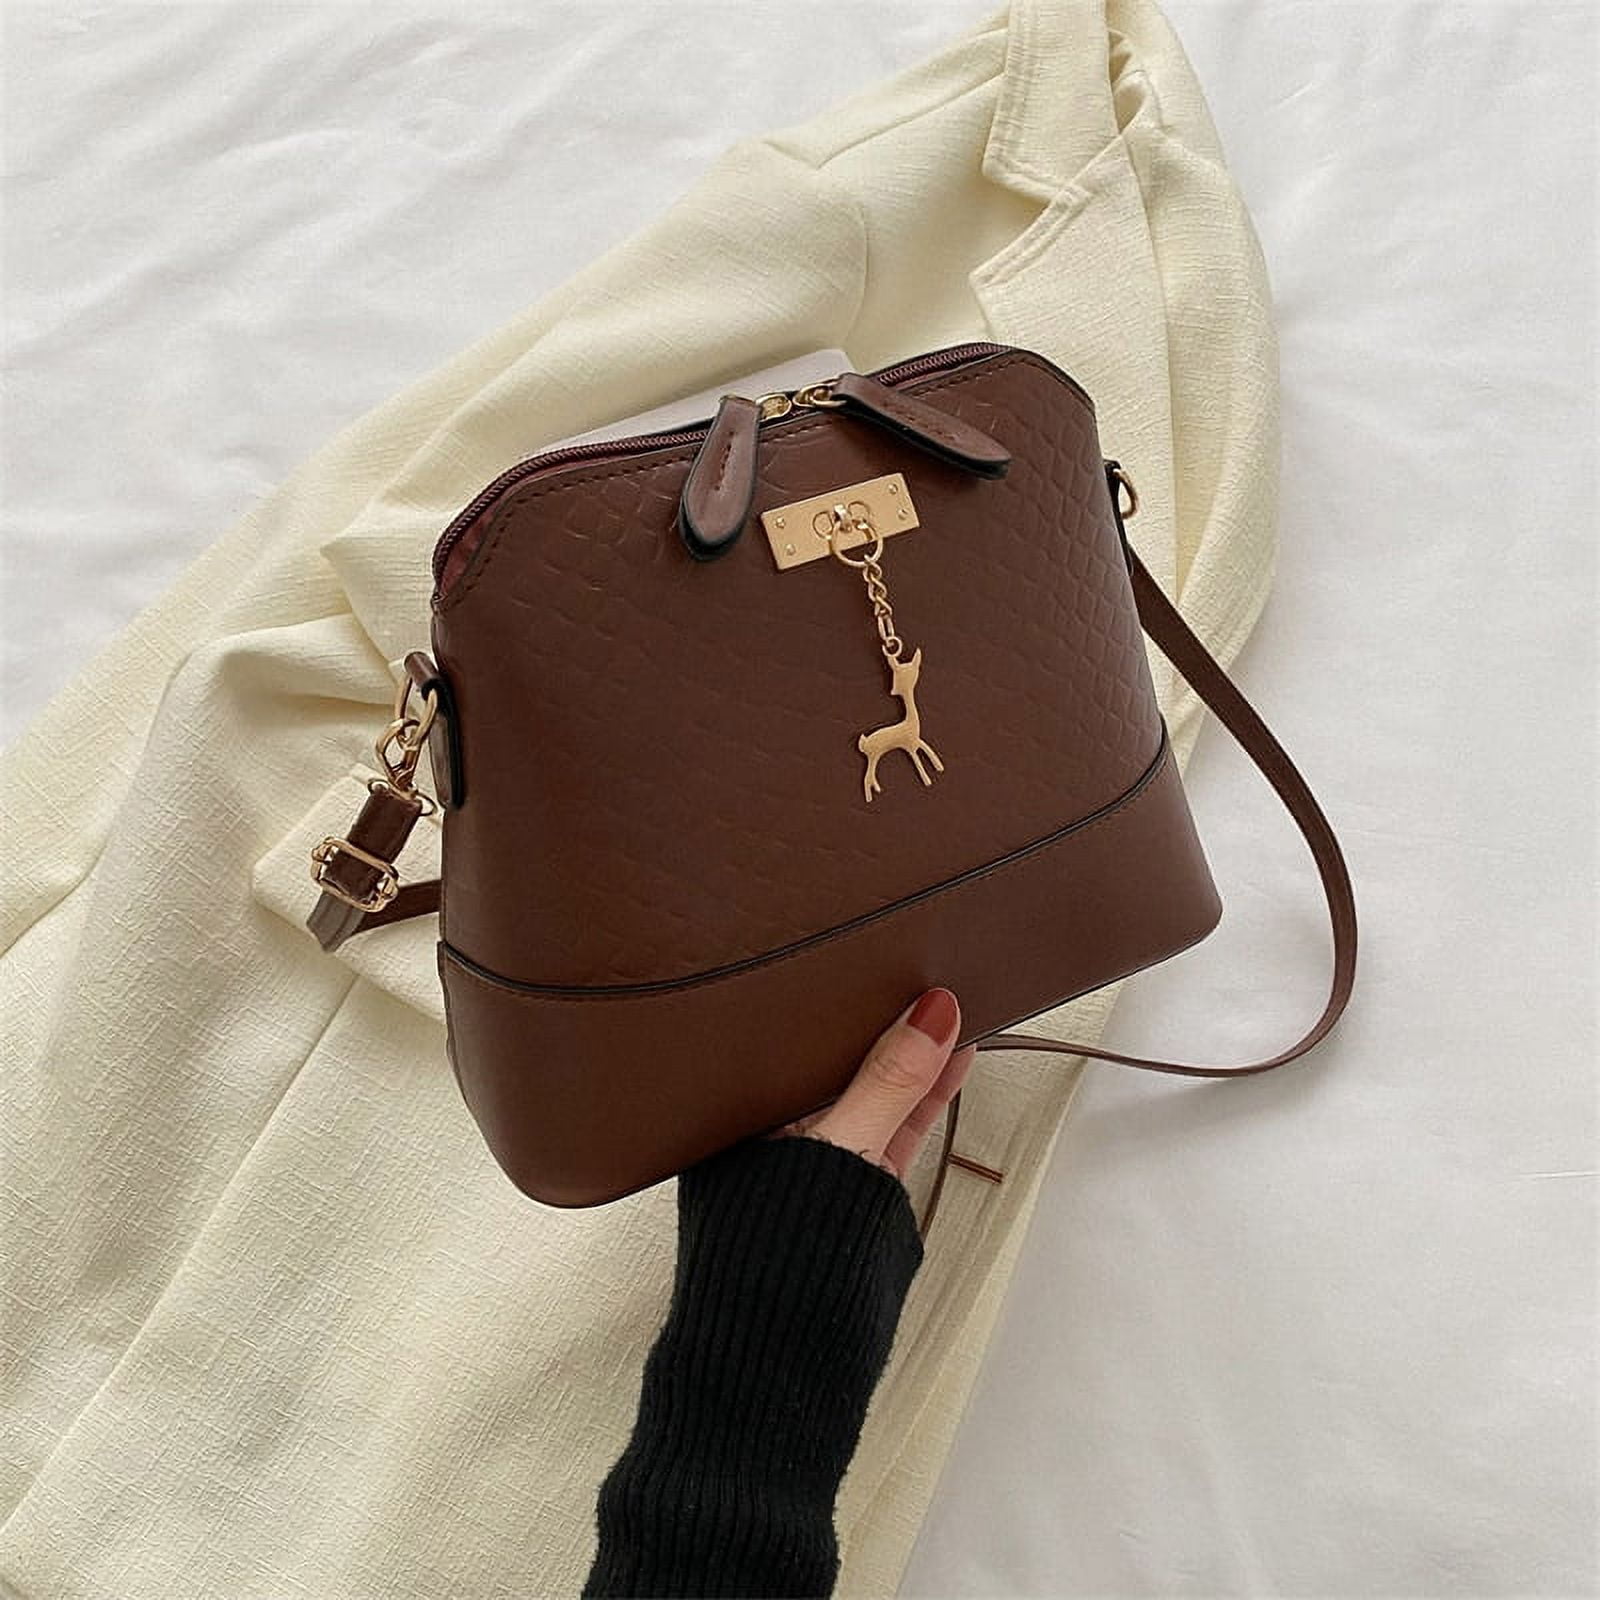 Kei By Karina From All Seller on Instagram: . NEW ARRIVAL Ready NEW BNIB L BEAUBOURG  HOBO Mini Monogram Braided size 25 x 15 x 20 cm 2019 Complete set with db